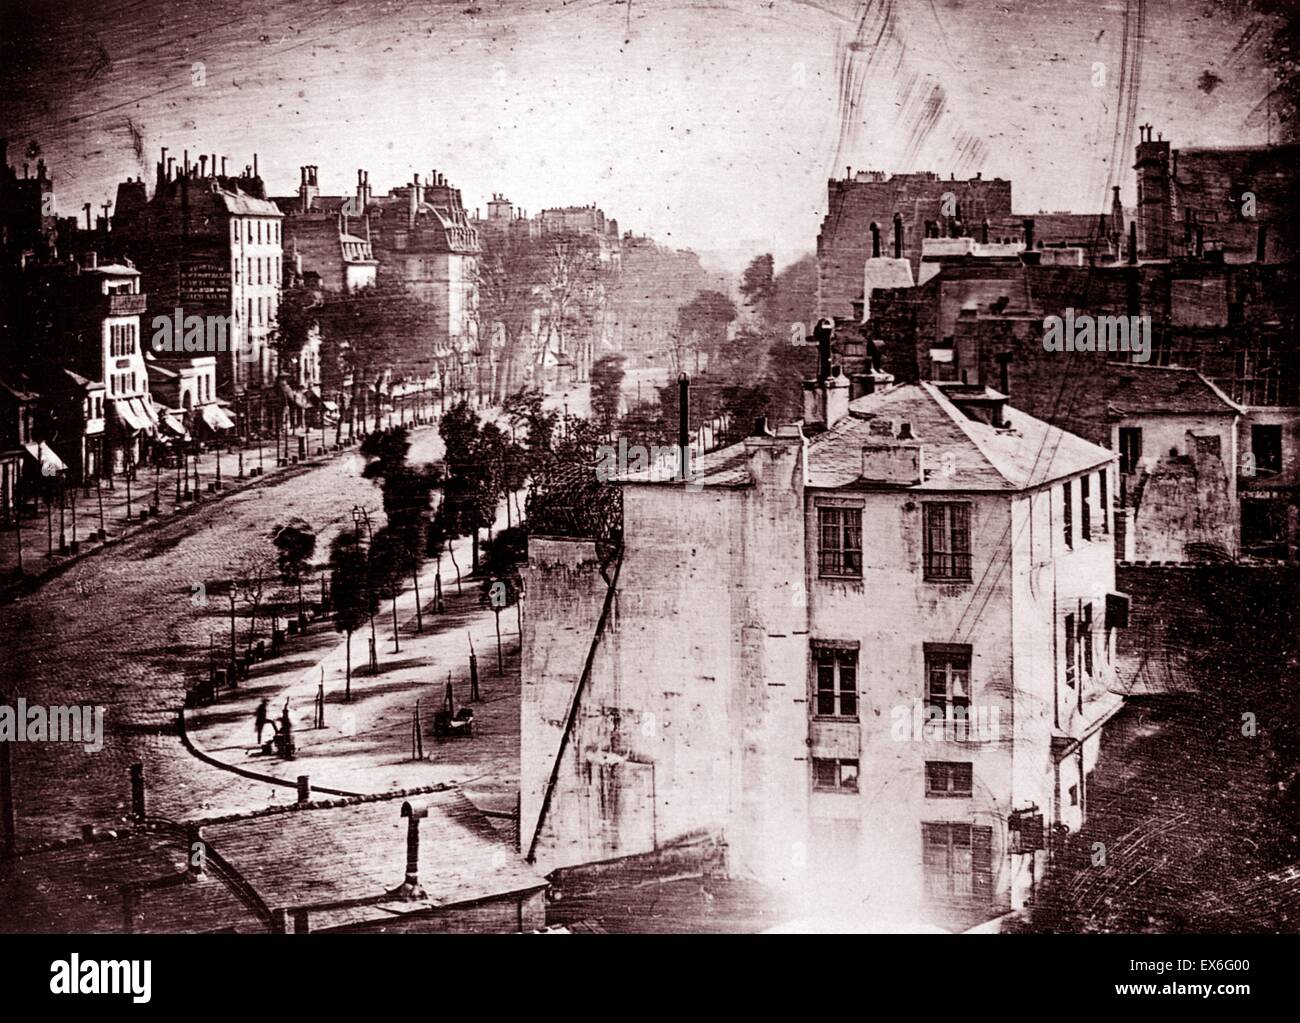 Boulevard du Temple, Paris, France, photographed by Louis Daguerre. Believed to be the earliest photograph showing a living person. Only the two men near the bottom left corner, one apparently having his boots polished by the other, stayed in one place lo Stock Photo